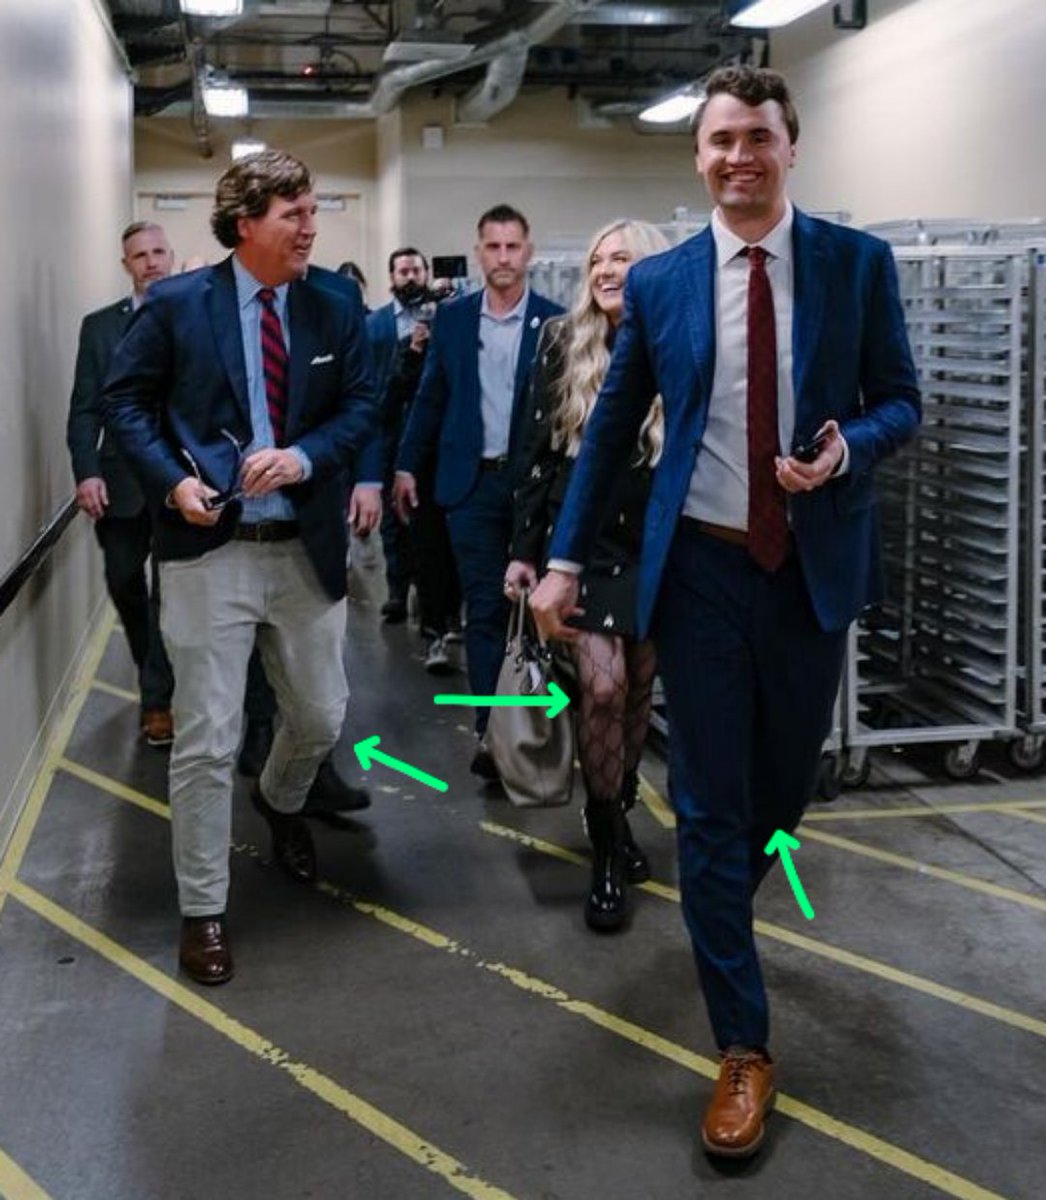 Look at the knees of Tucker Carlson, ERIKa + Charlene Kirk to help you 🙈 see what gender they REALLY are.

#EGI #TuckerCarlson #charliekirk #turningpointusa
#turningpoint